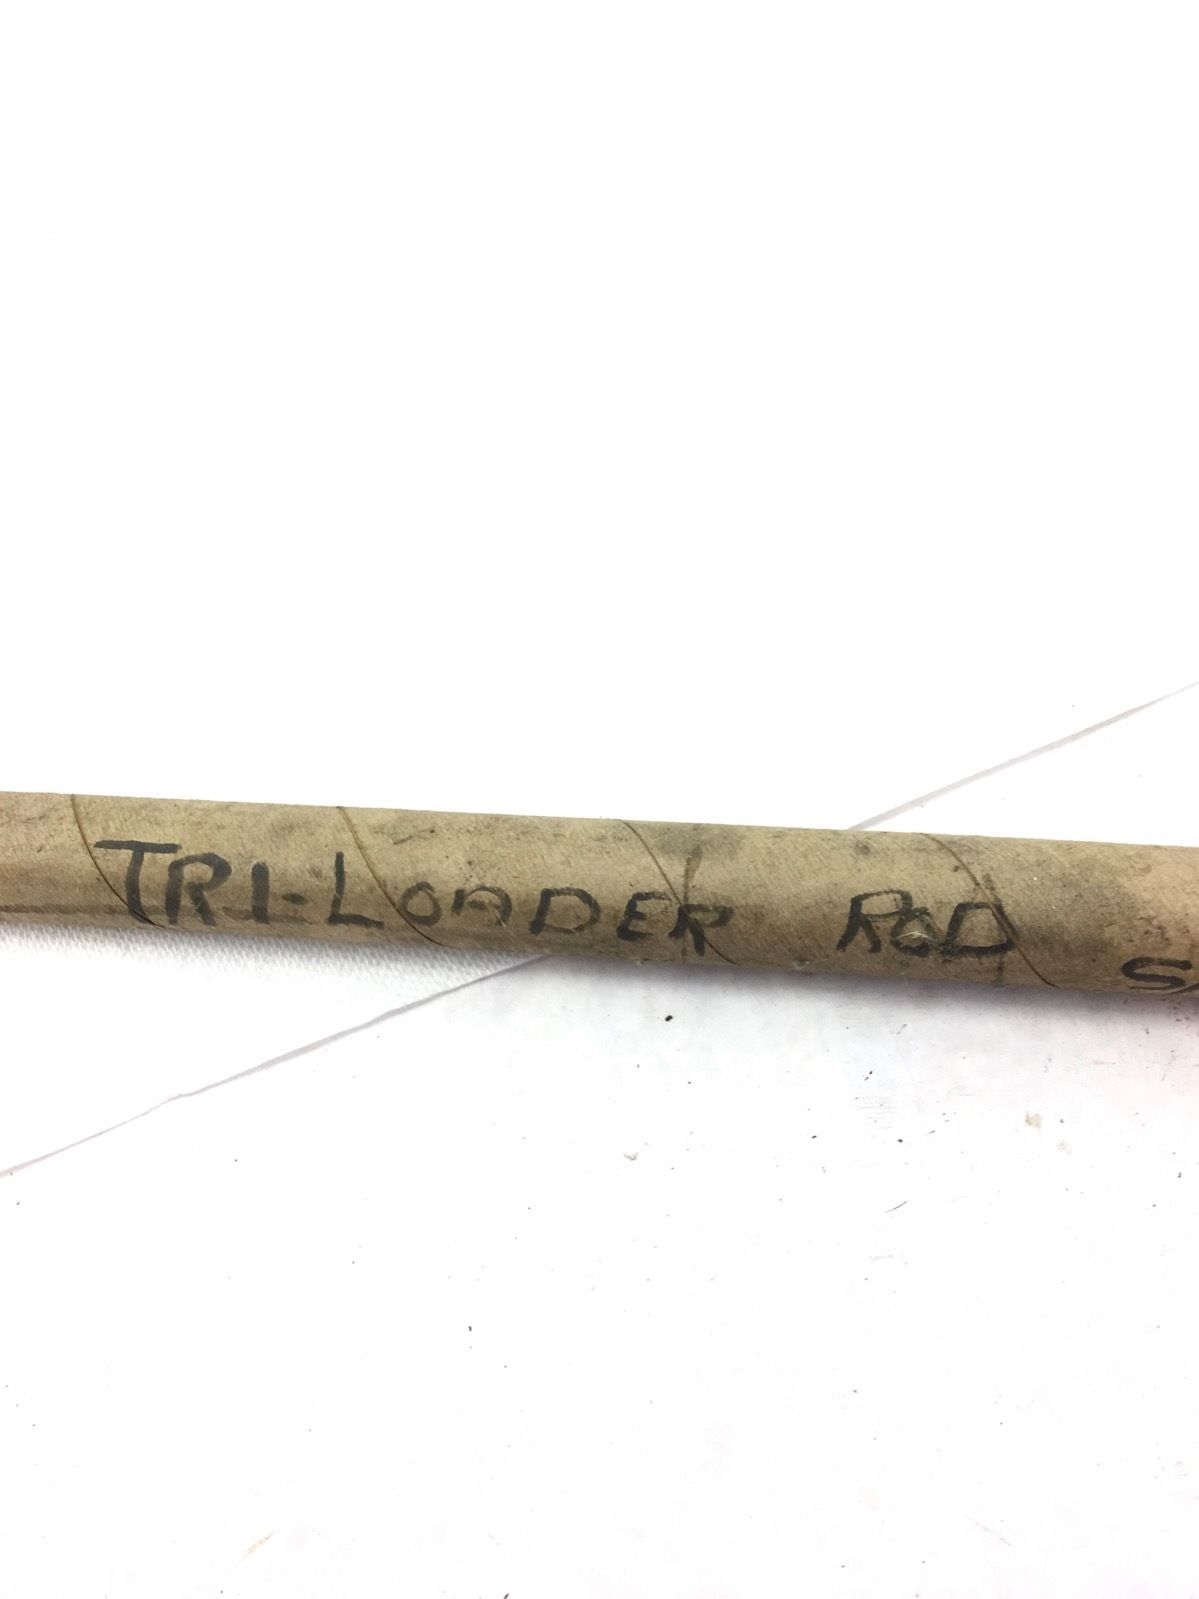 NEW S/S 20387 TRI LOADER ROD, APPROX 30 INCHES LONG, FAST SHIPPING! B350 2